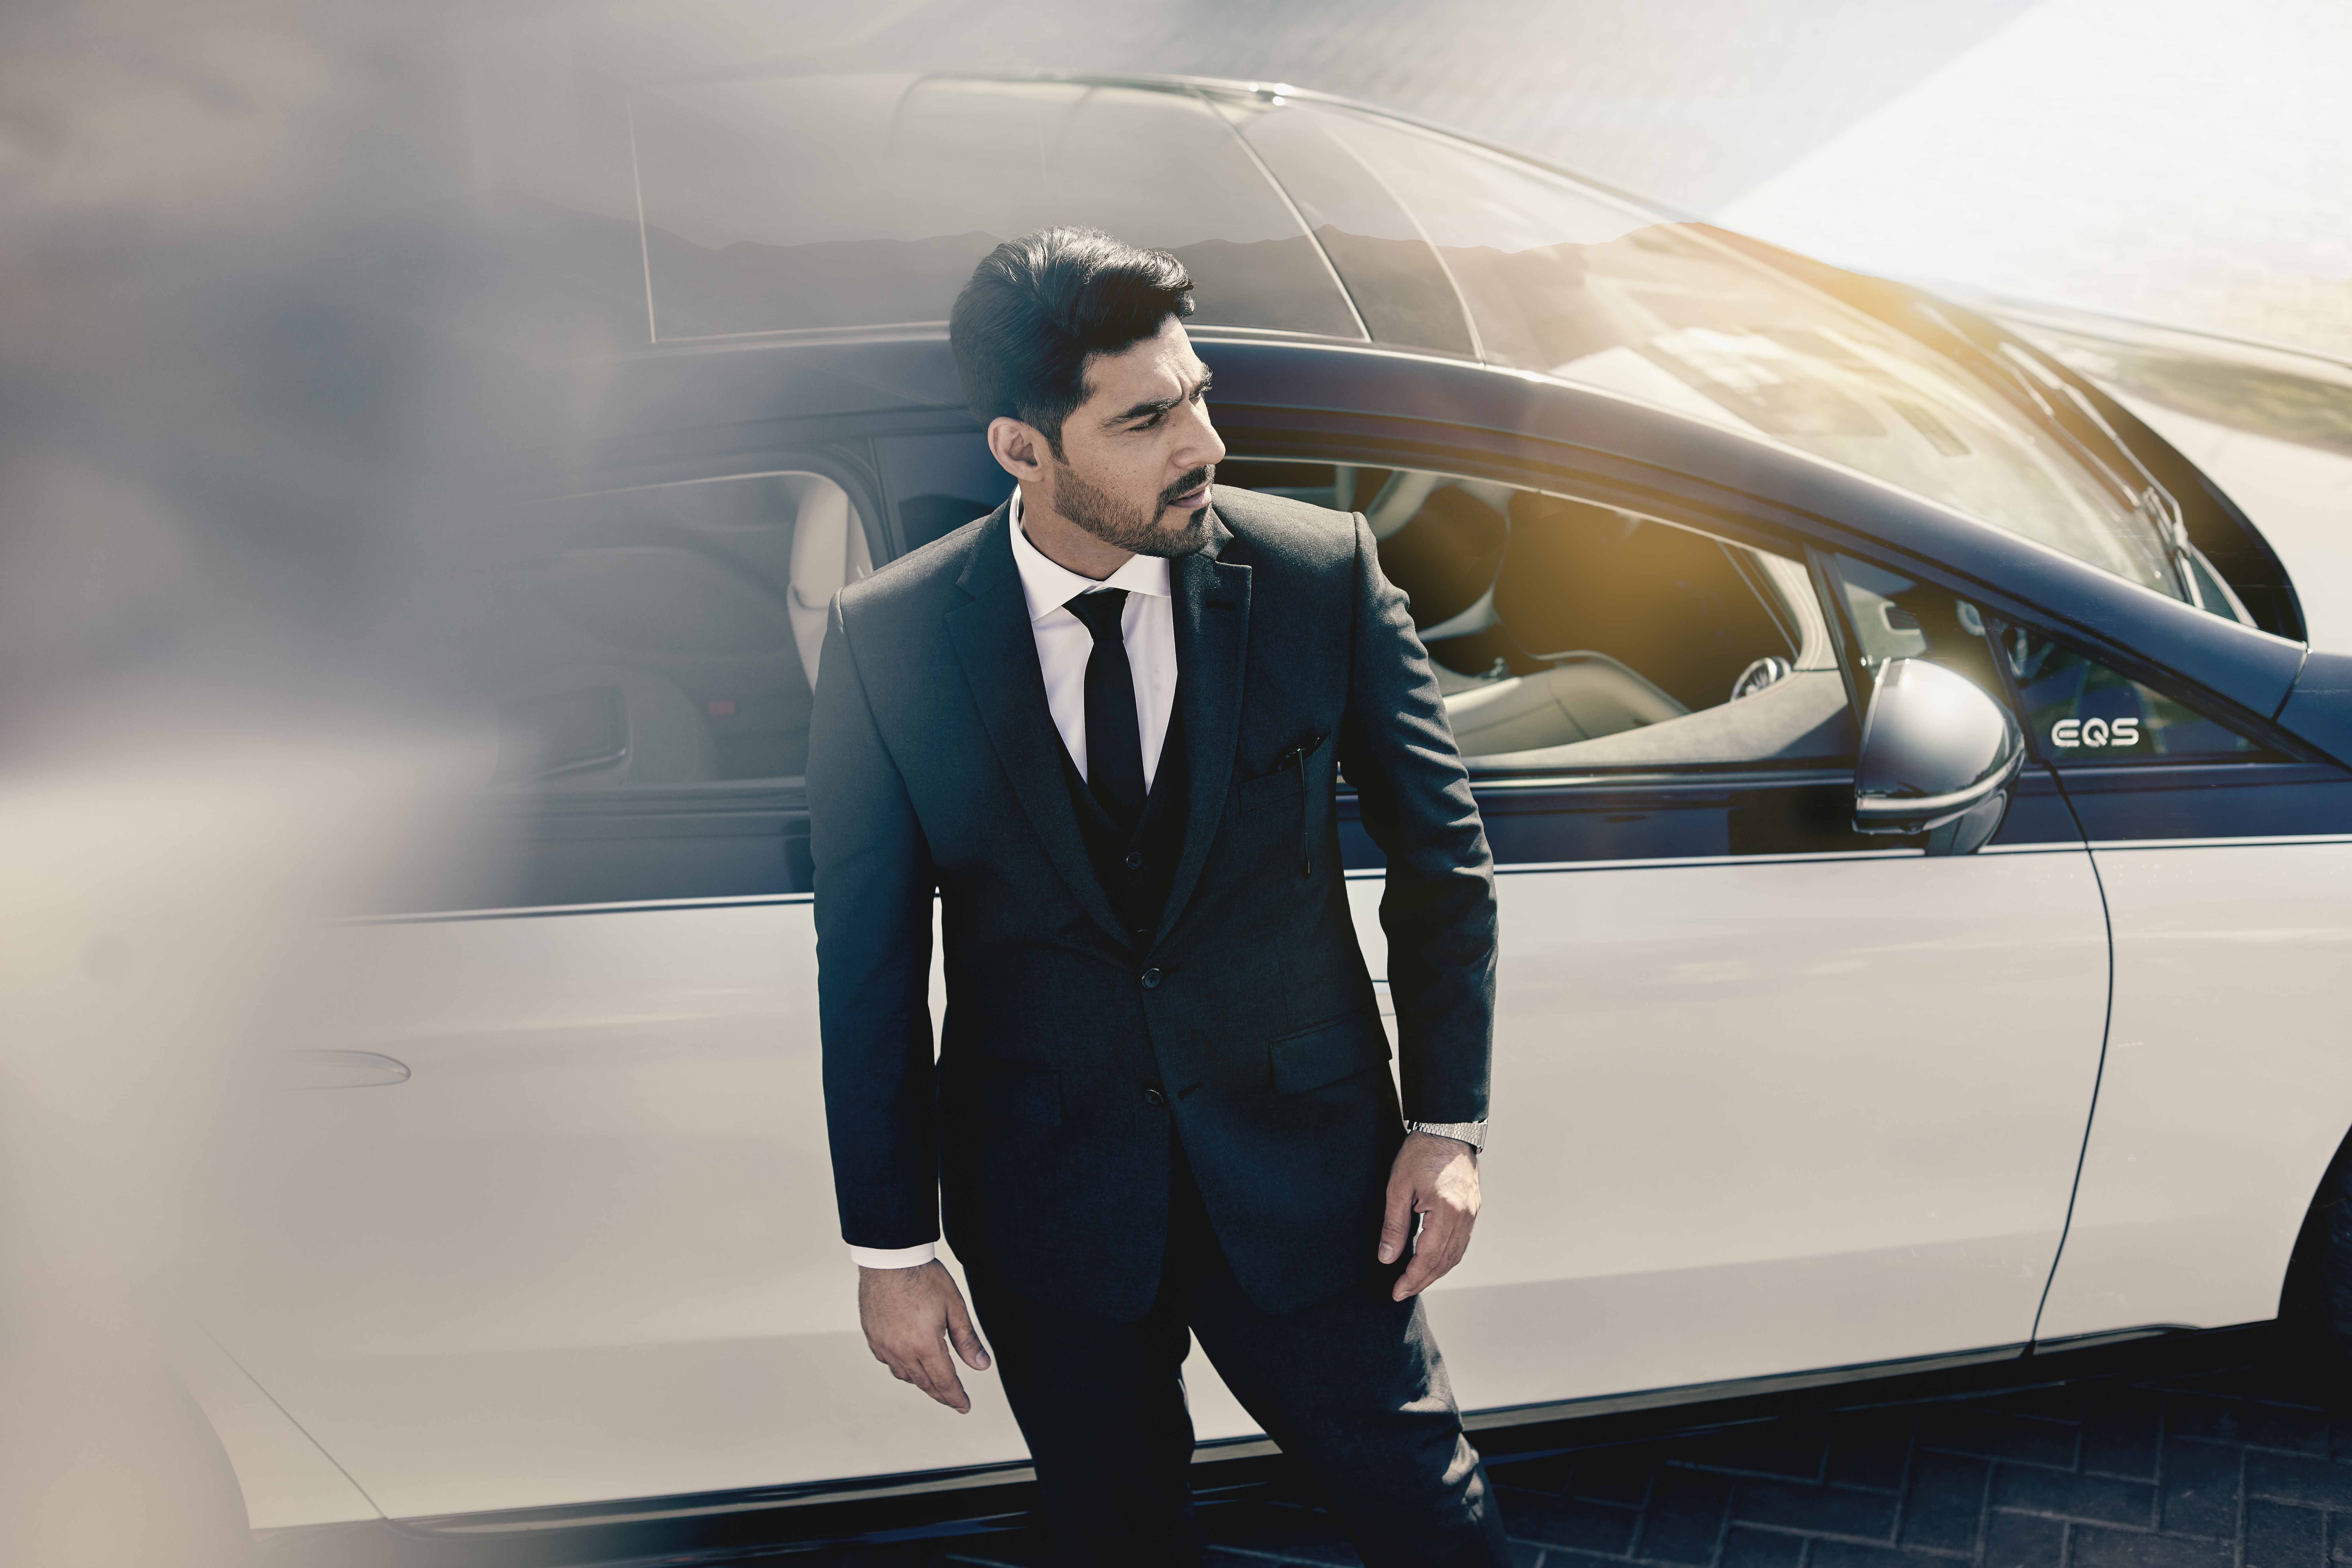 Smartly dressed chauffeur stands near vehicle in Dubai.